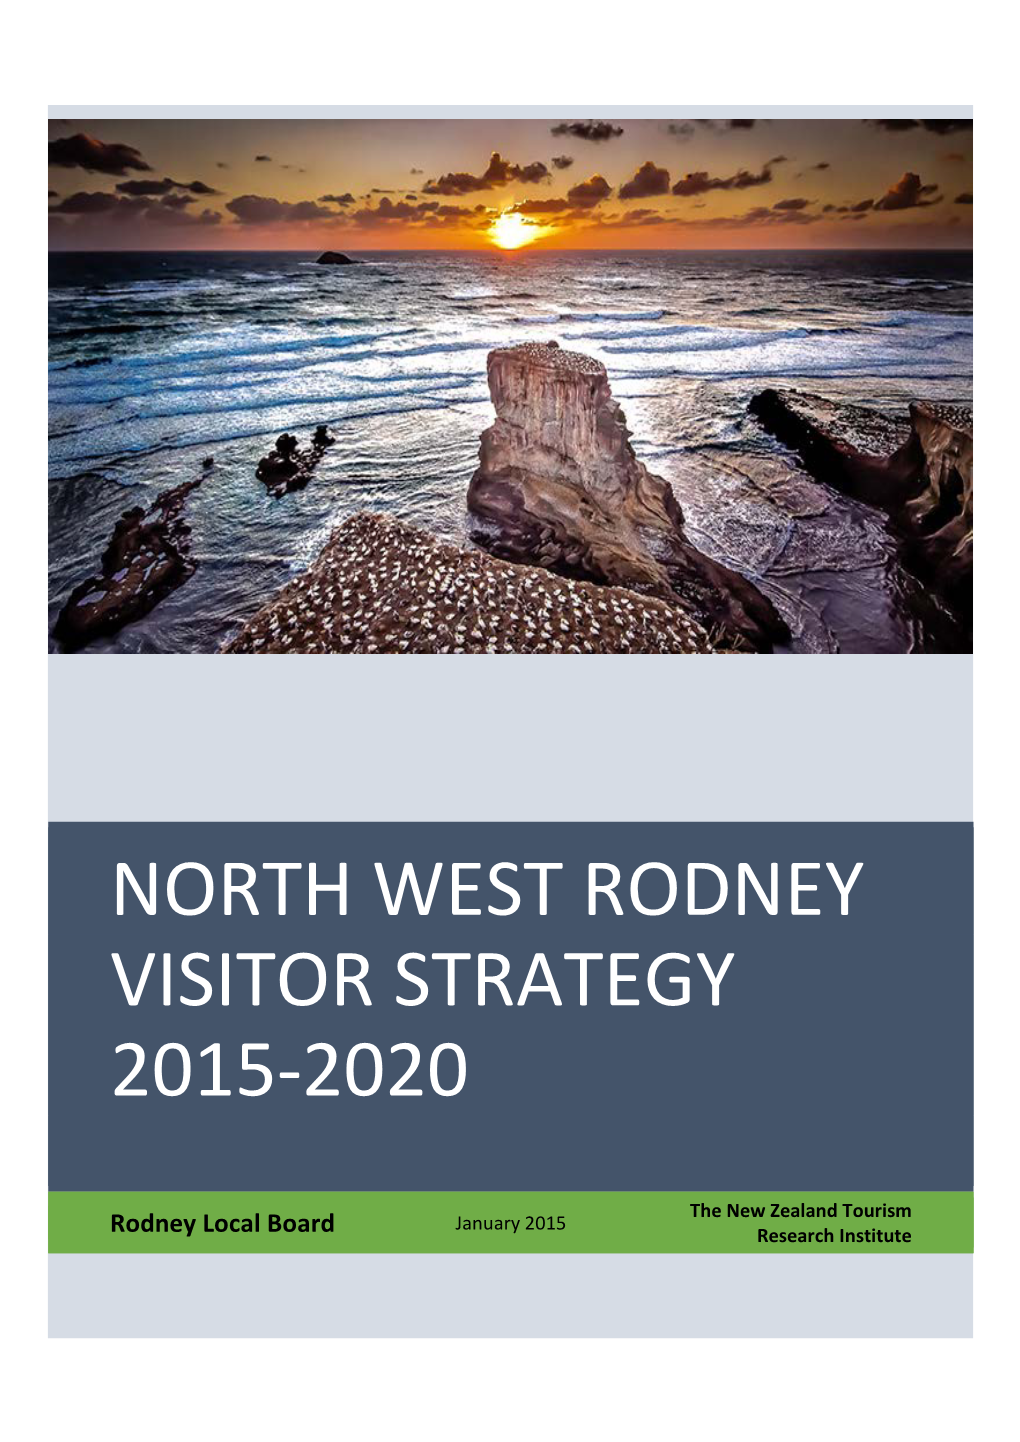 North West Rodney Visitor Strategy 2015-2020